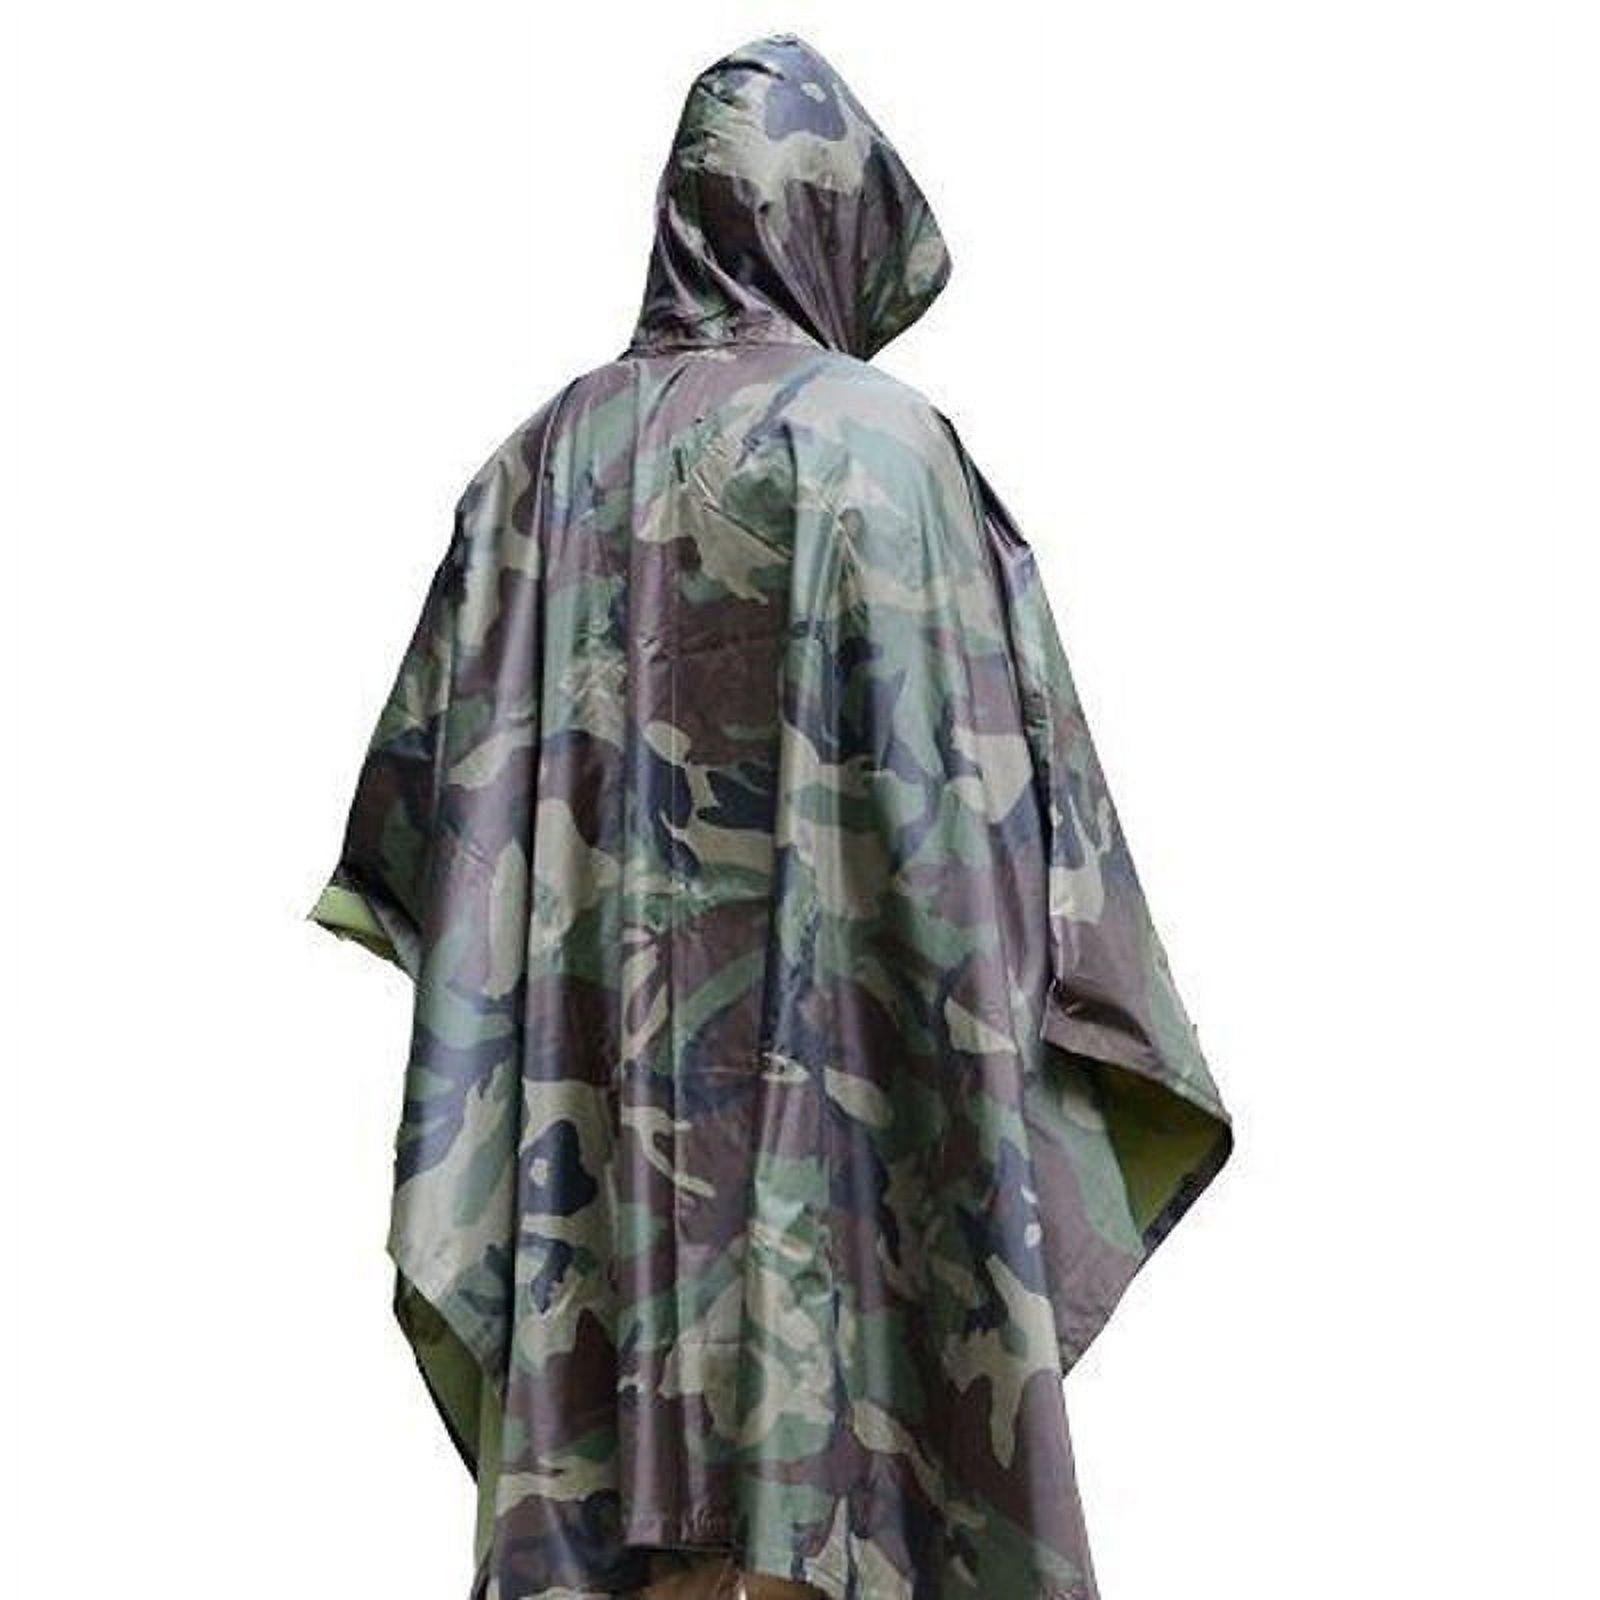 Army Combat Military Festival Poncho BTP Camo Waterproof Rain Cover Jacket - image 1 of 5